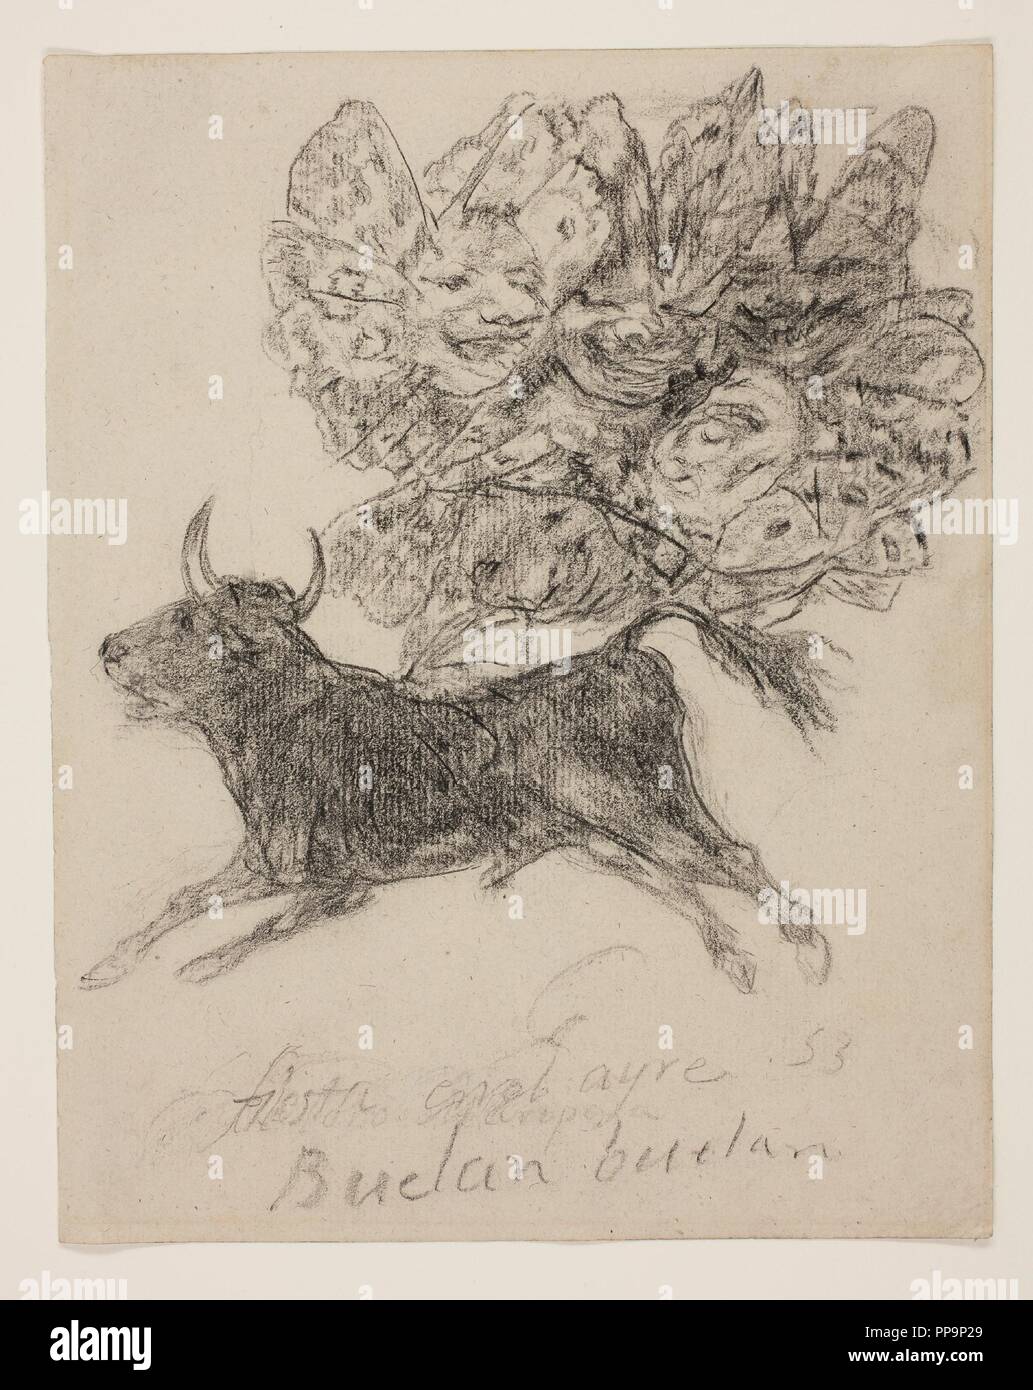 Francisco de Goya y Lucientes / 'The butterfly bull. Fiesta in the air. They fly and fly. (Album G, 53)'. 1825 - 1828. Black chalk, Lithographic crayon on grey laid paper. Museum: Museo del Prado, Madrid, España. Stock Photo